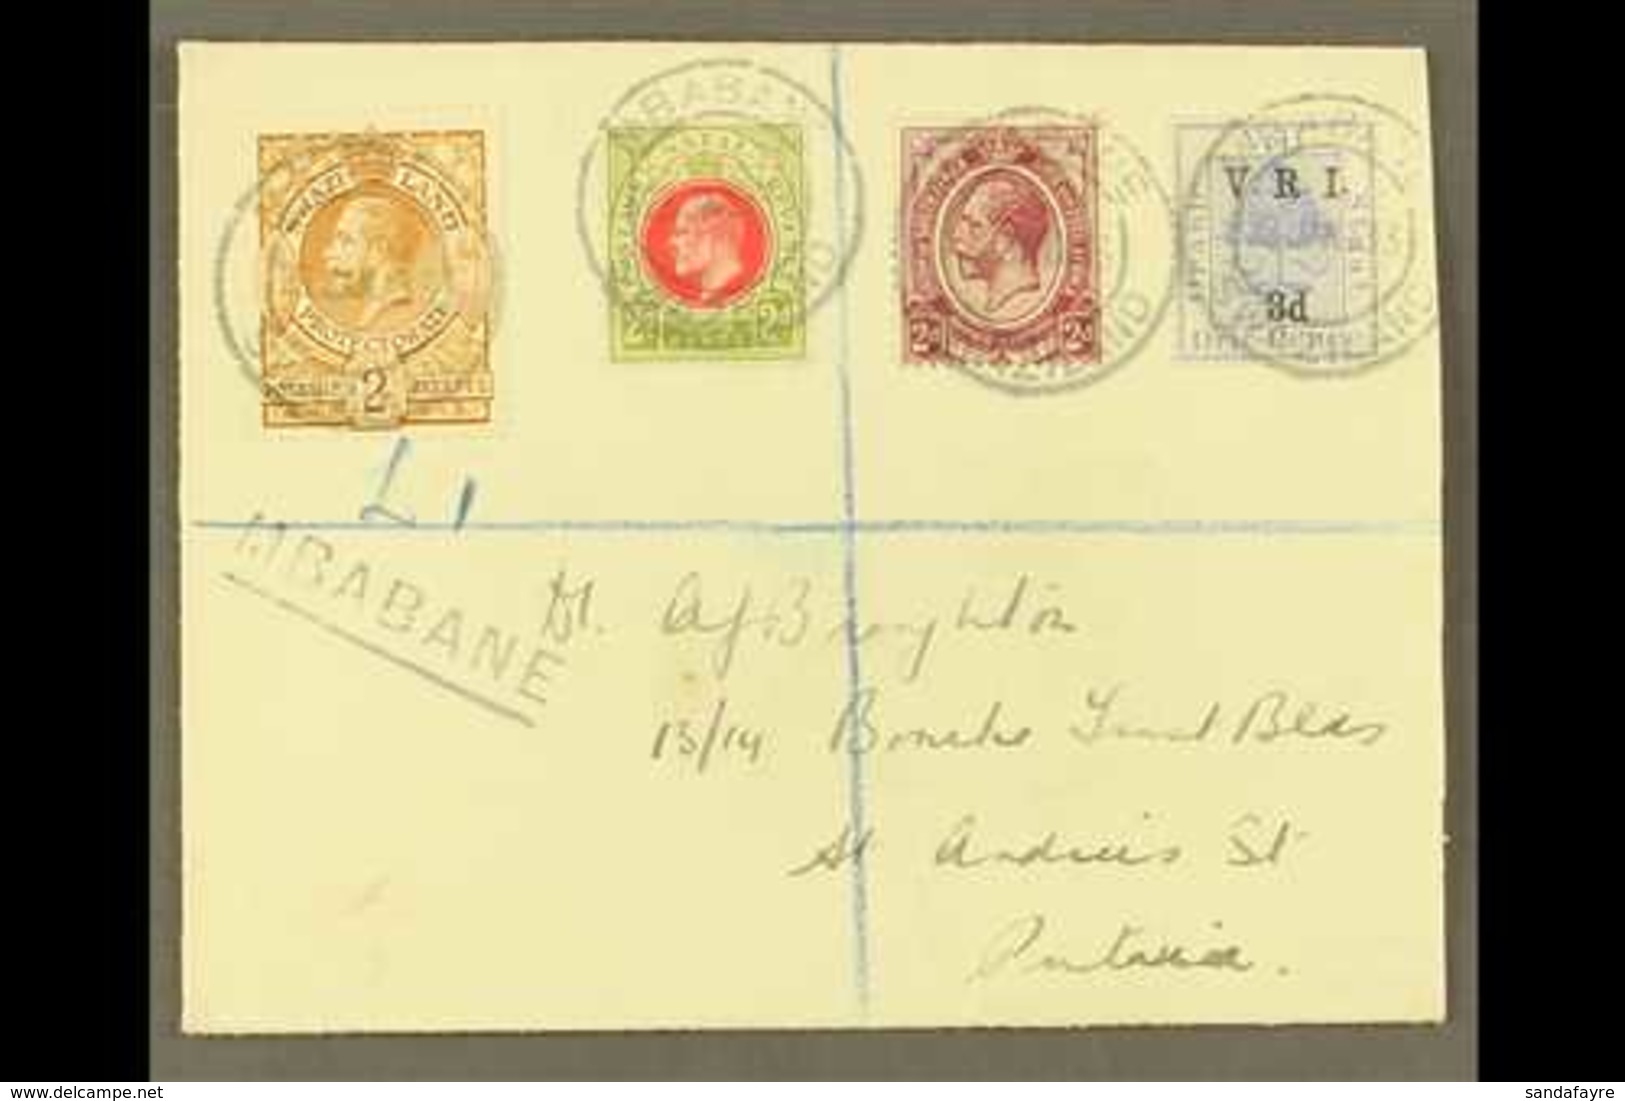 1933 (23 Jan) Registered Env From Mbabane To Pretoria Bearing Natal 2d, OFS 3d, SA 2d & Swaziland 2d Stamps Tied Mbabane - Swasiland (...-1967)